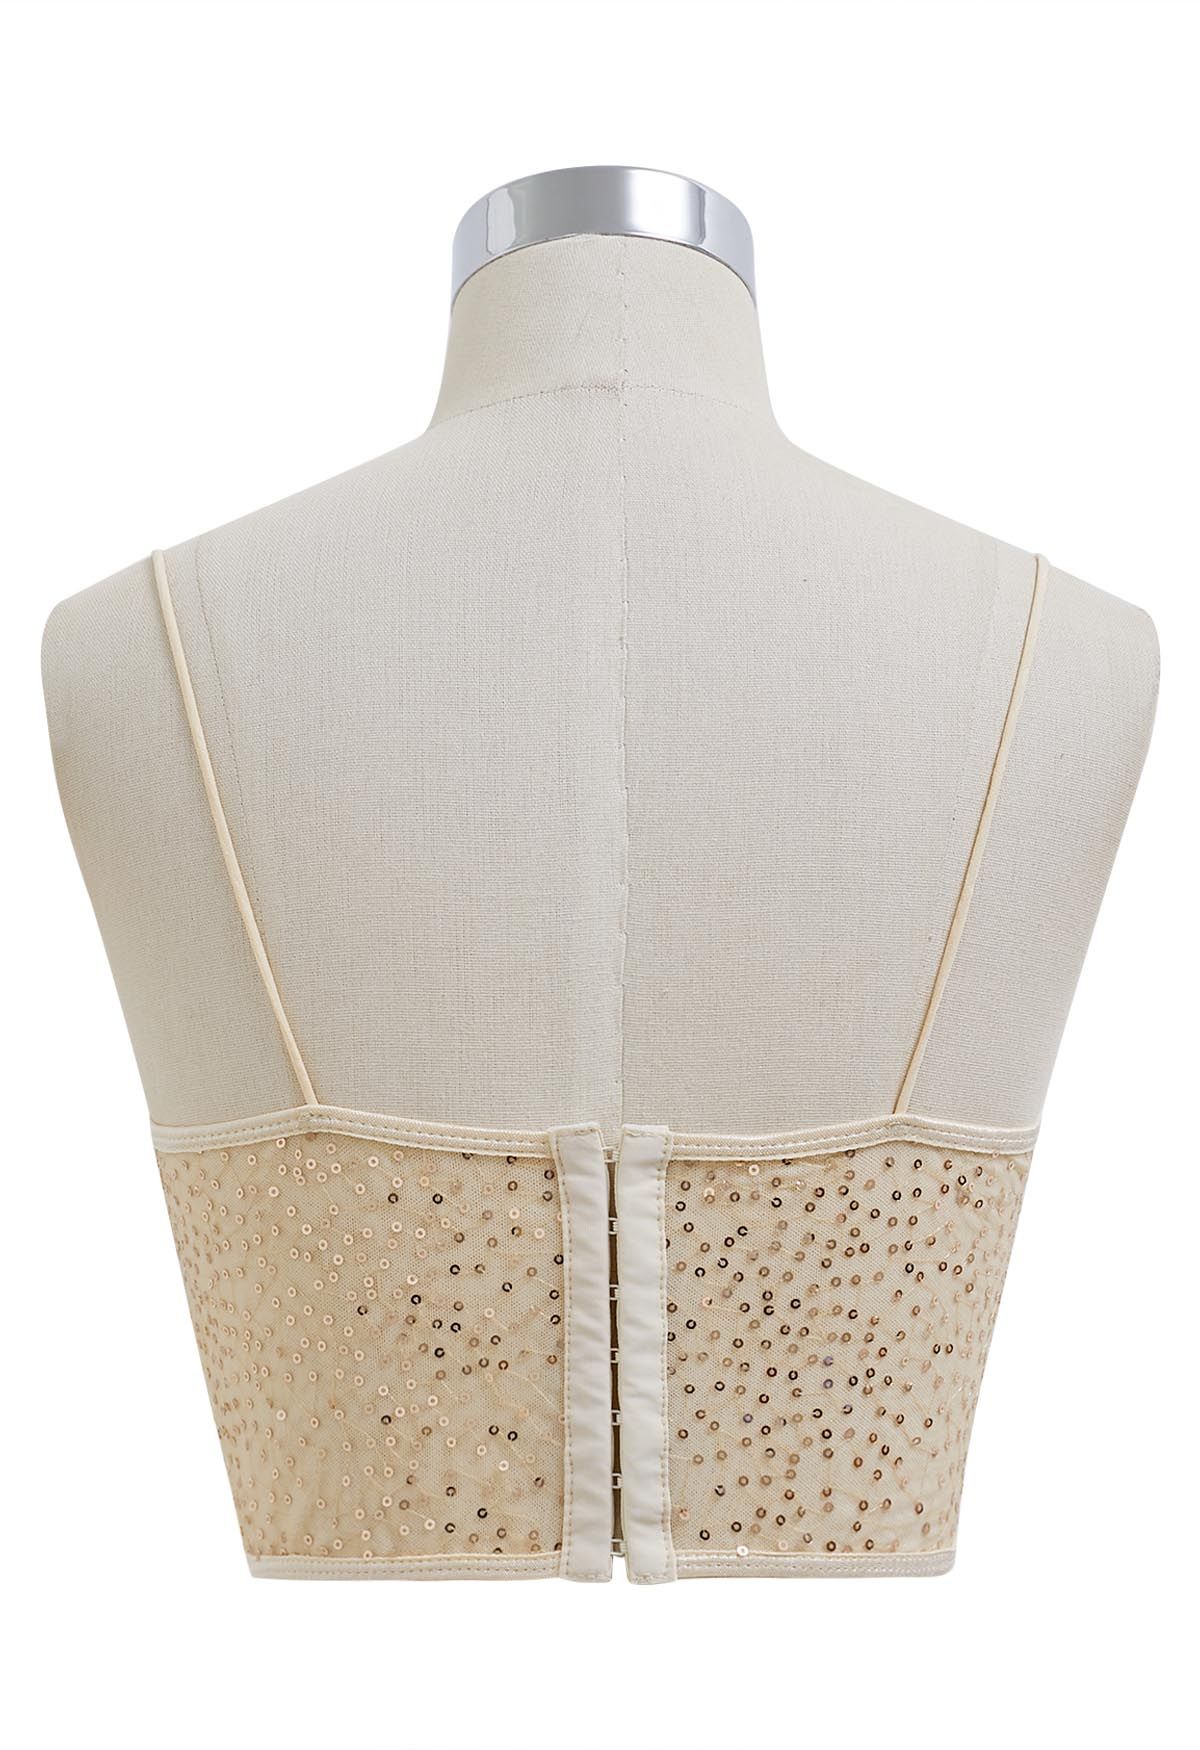 Sequin Embroidered Corset Bustier Top in Cream